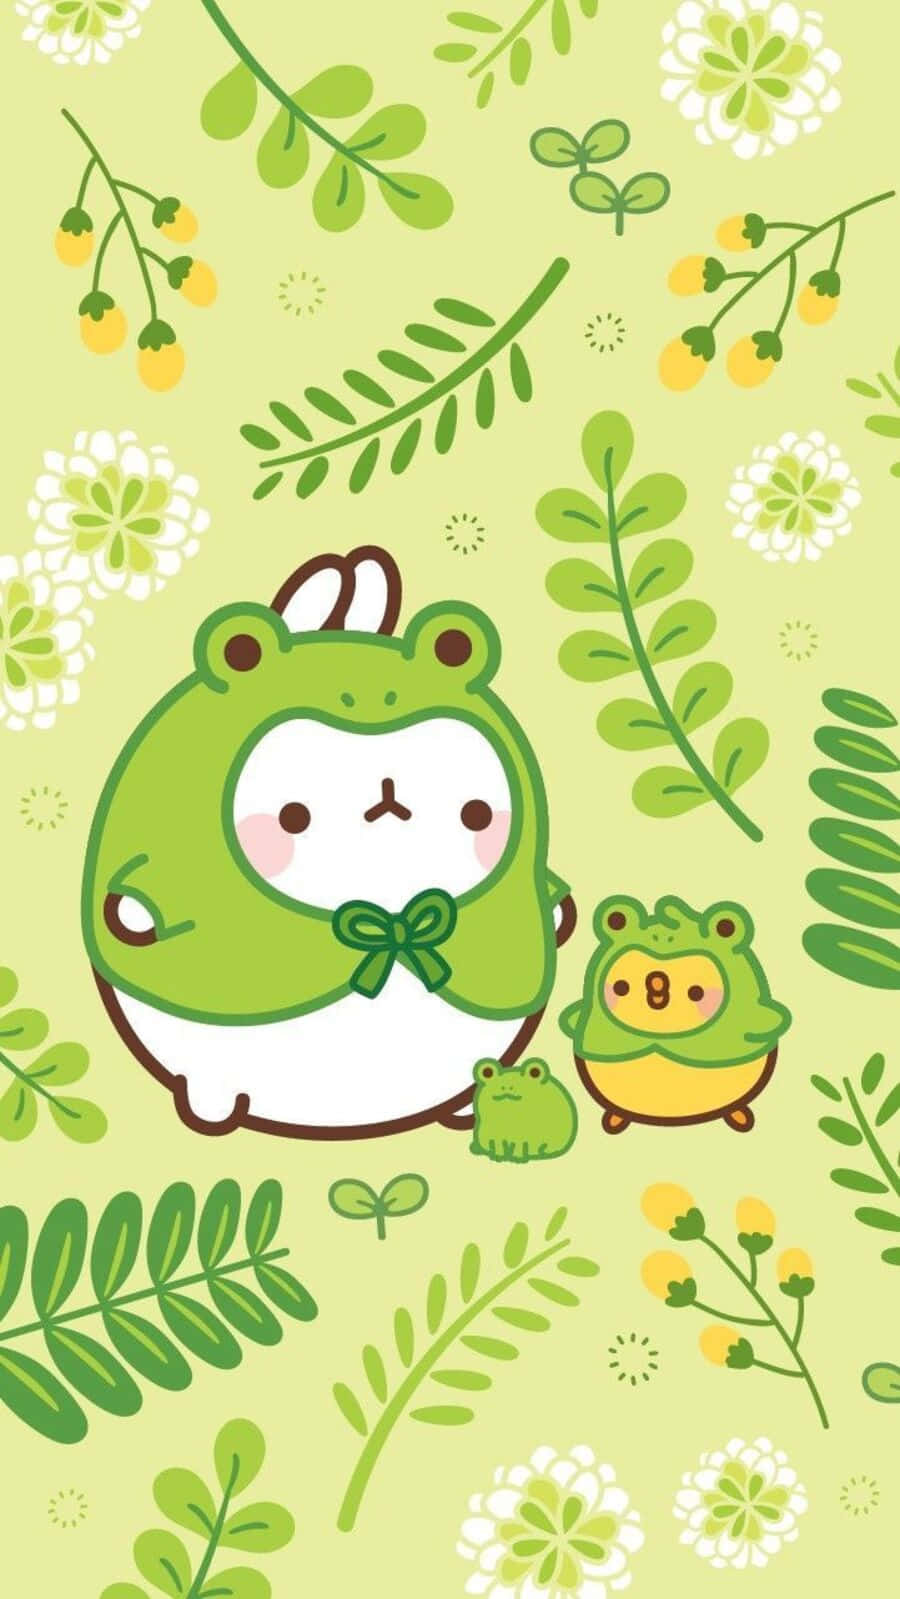 A Vibrant Aesthetic Frog in Nature Wallpaper